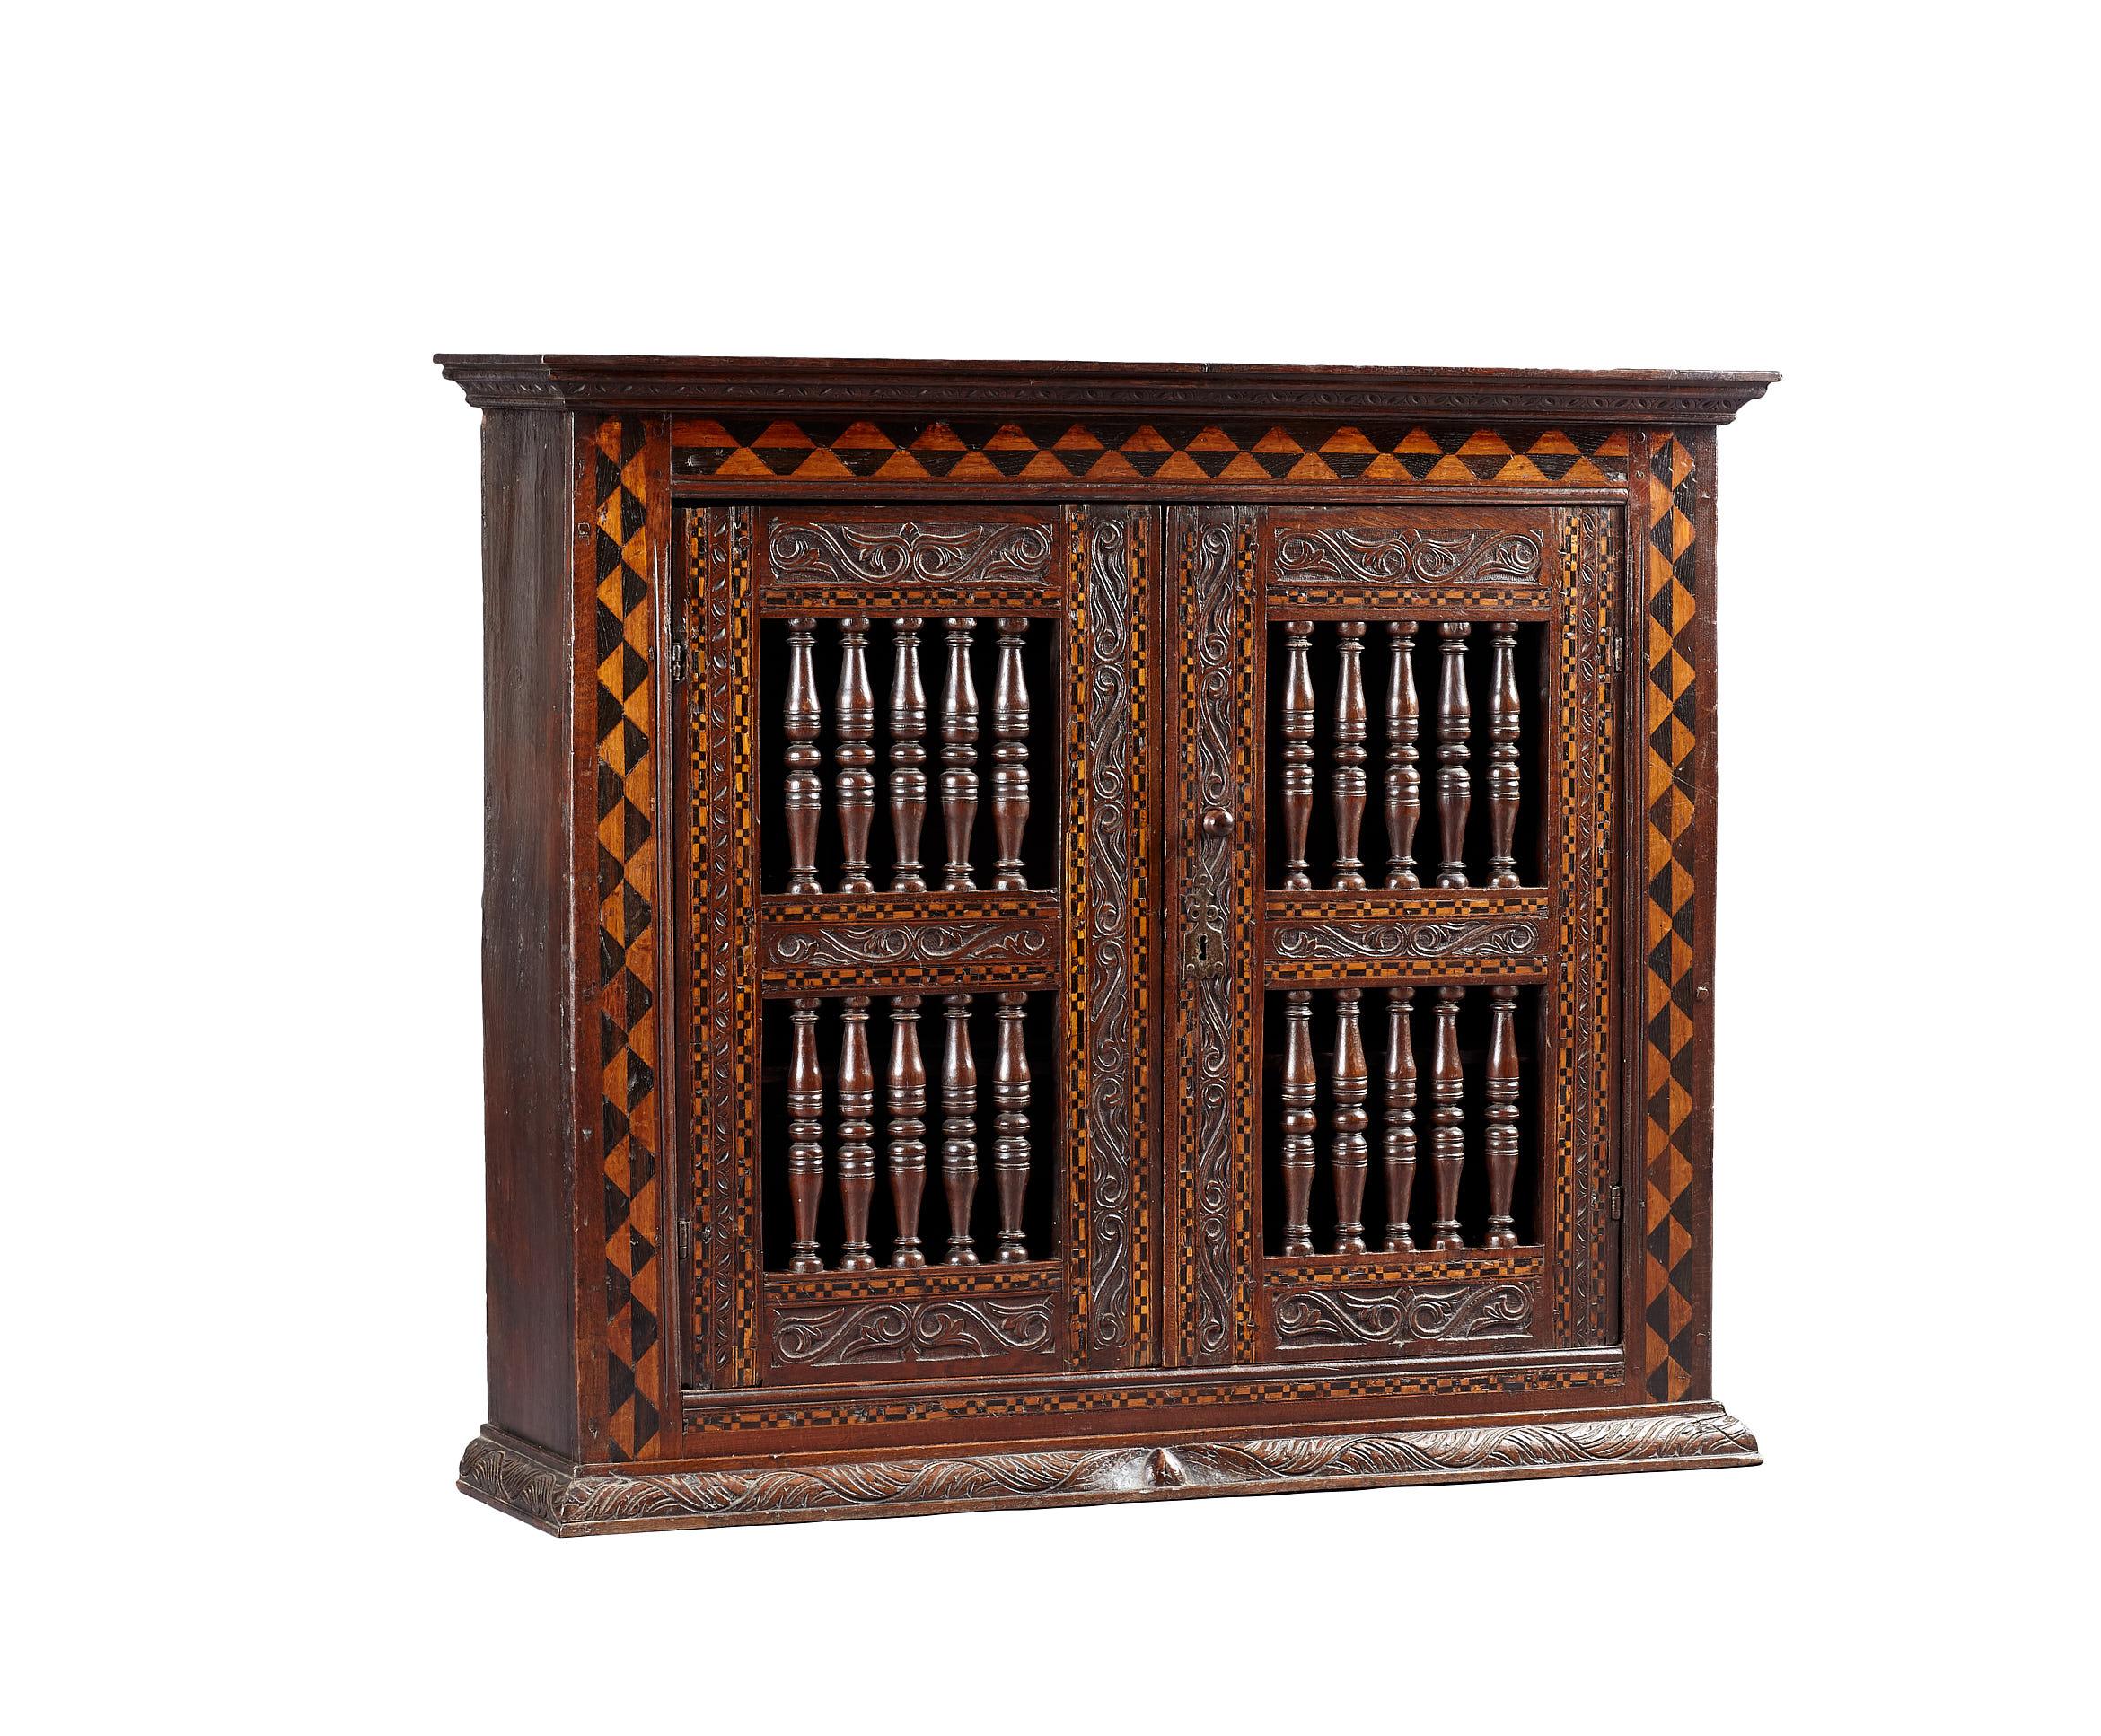 Late Elizabethan Inlaid Oak Mural wall or glass cupboard, English circa 1590 - 1600.

The joined framed wall cupboard with carved cornice above contrasting chevron inlays of Bog Oak & Holly, with twin spindle filled doors, further floral interlace